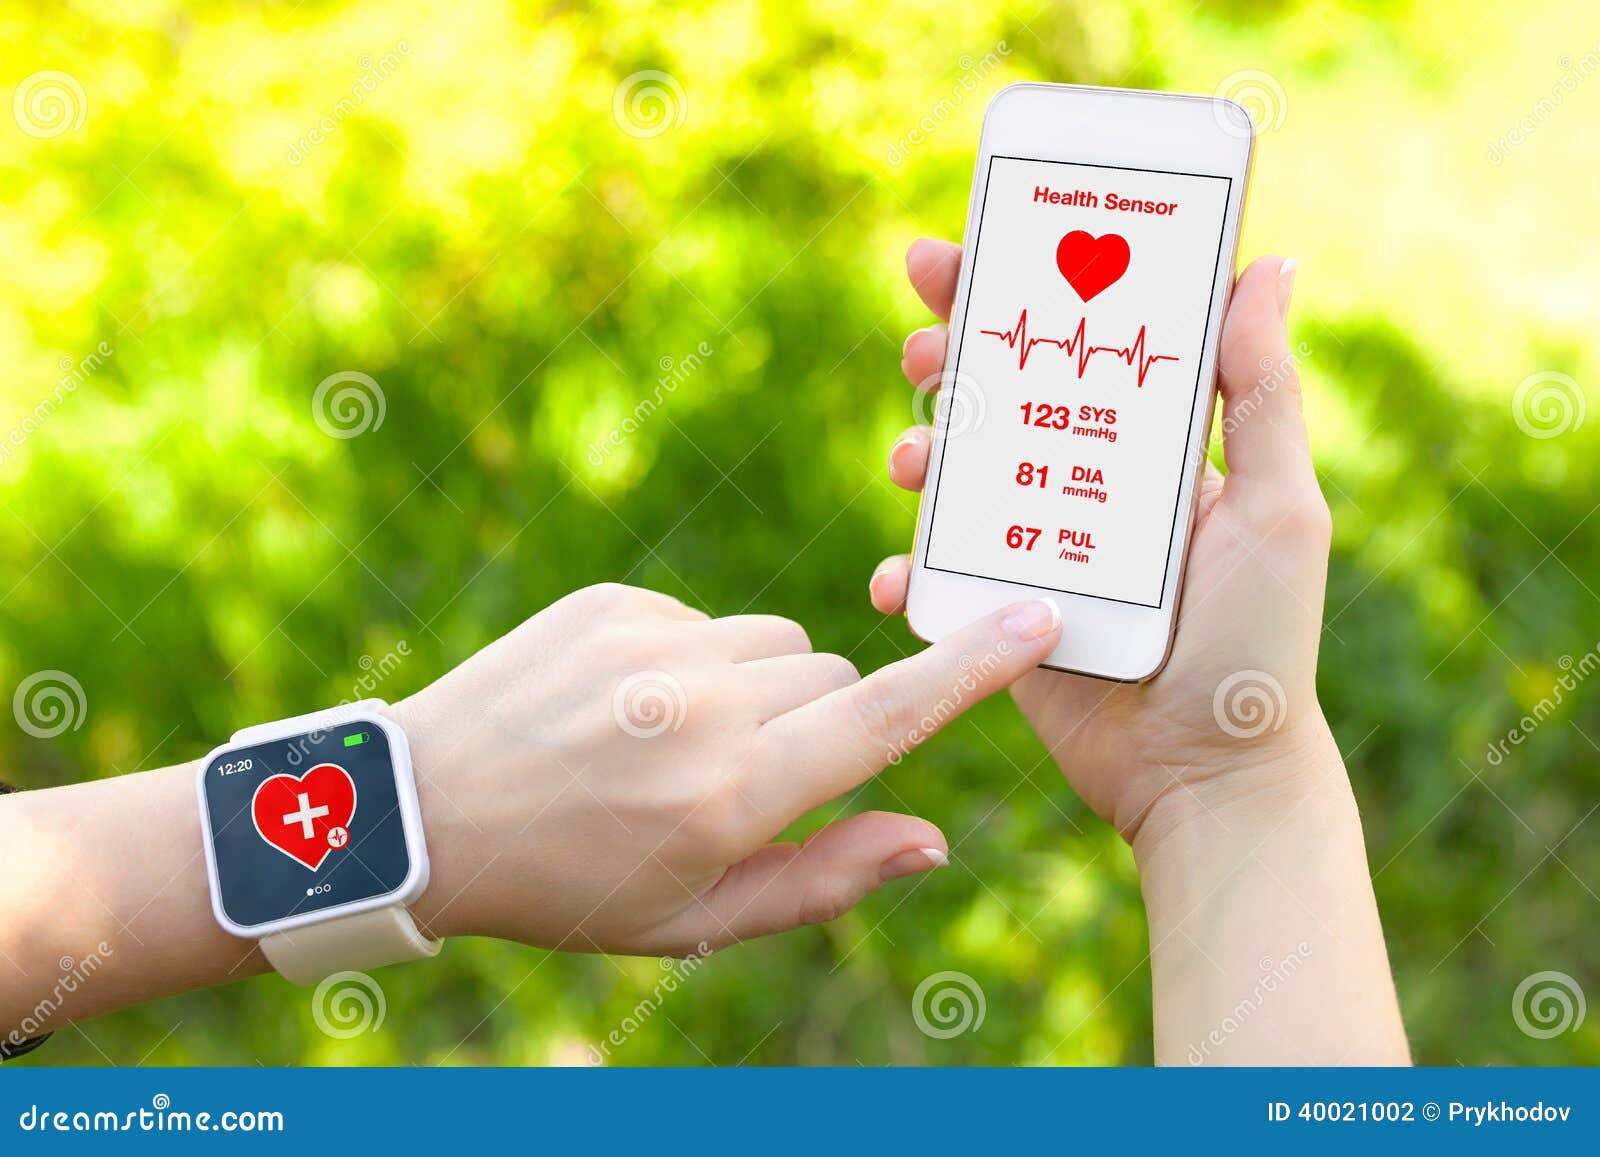 Touch Phone And Smart Watch With Mobile App Health Sensor ...